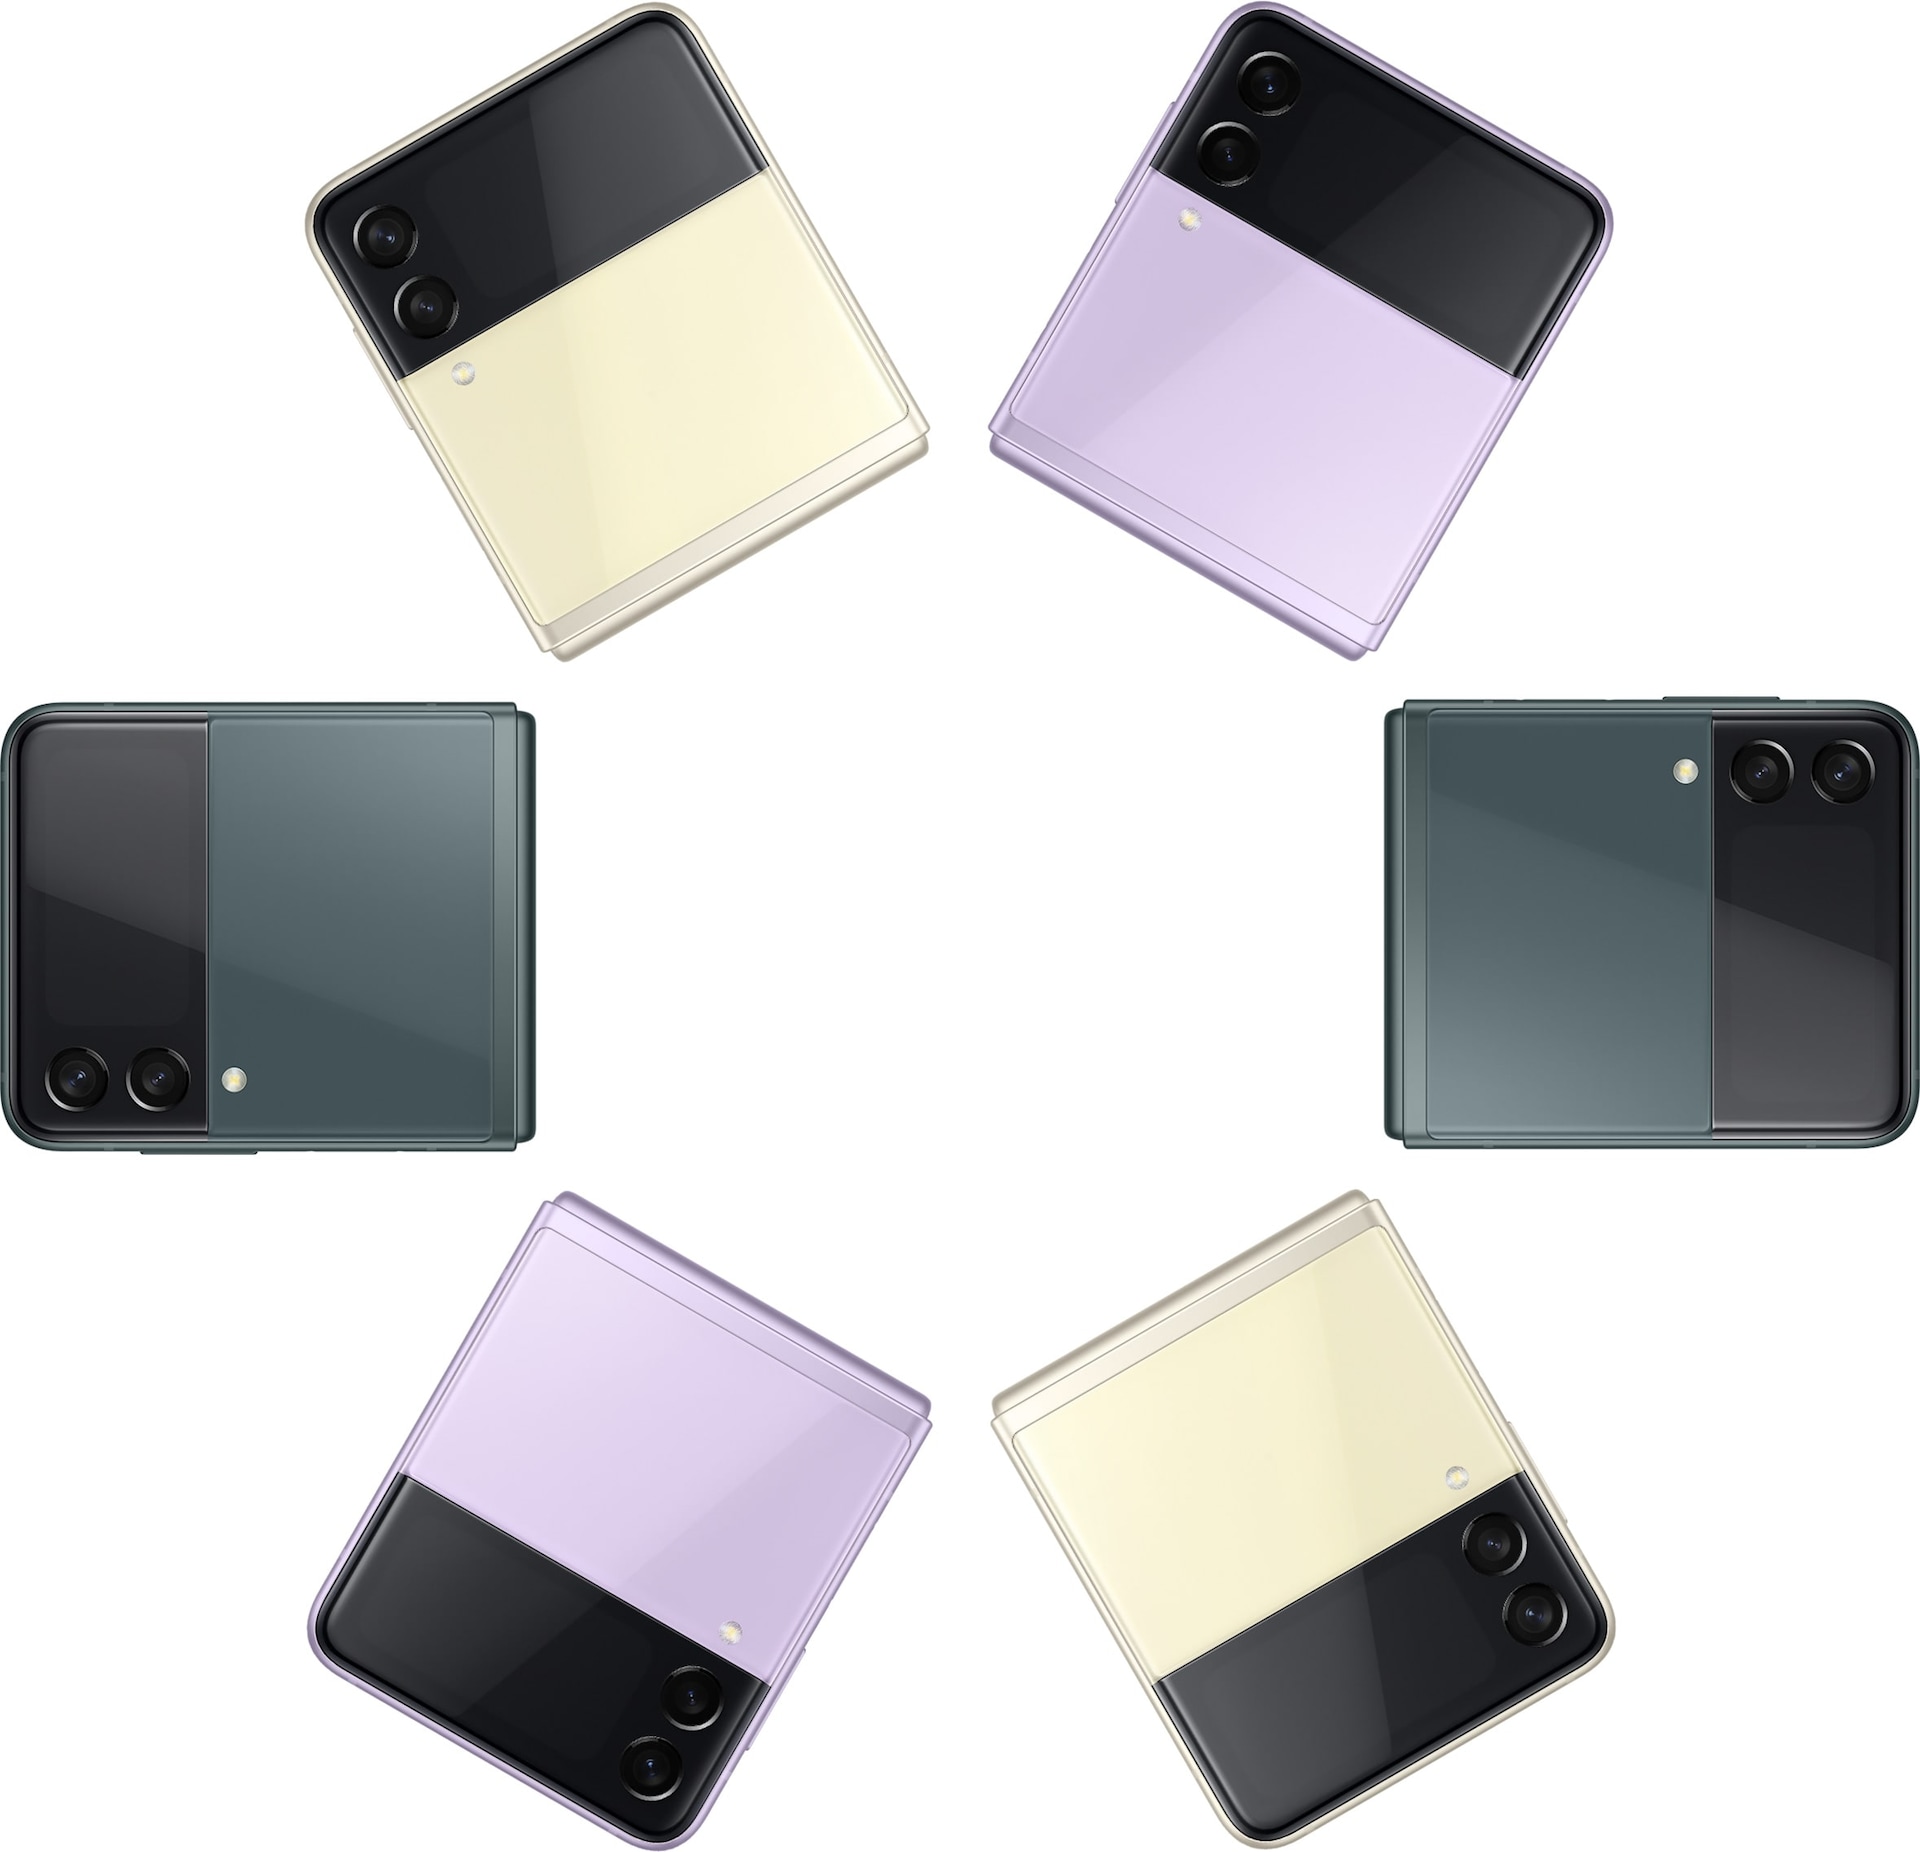 Six Galaxy Z Flip3 5G phones, all folded and seen from the Front Cover. Two in Cream, two in Lavender and two in Green, all alternating colors.